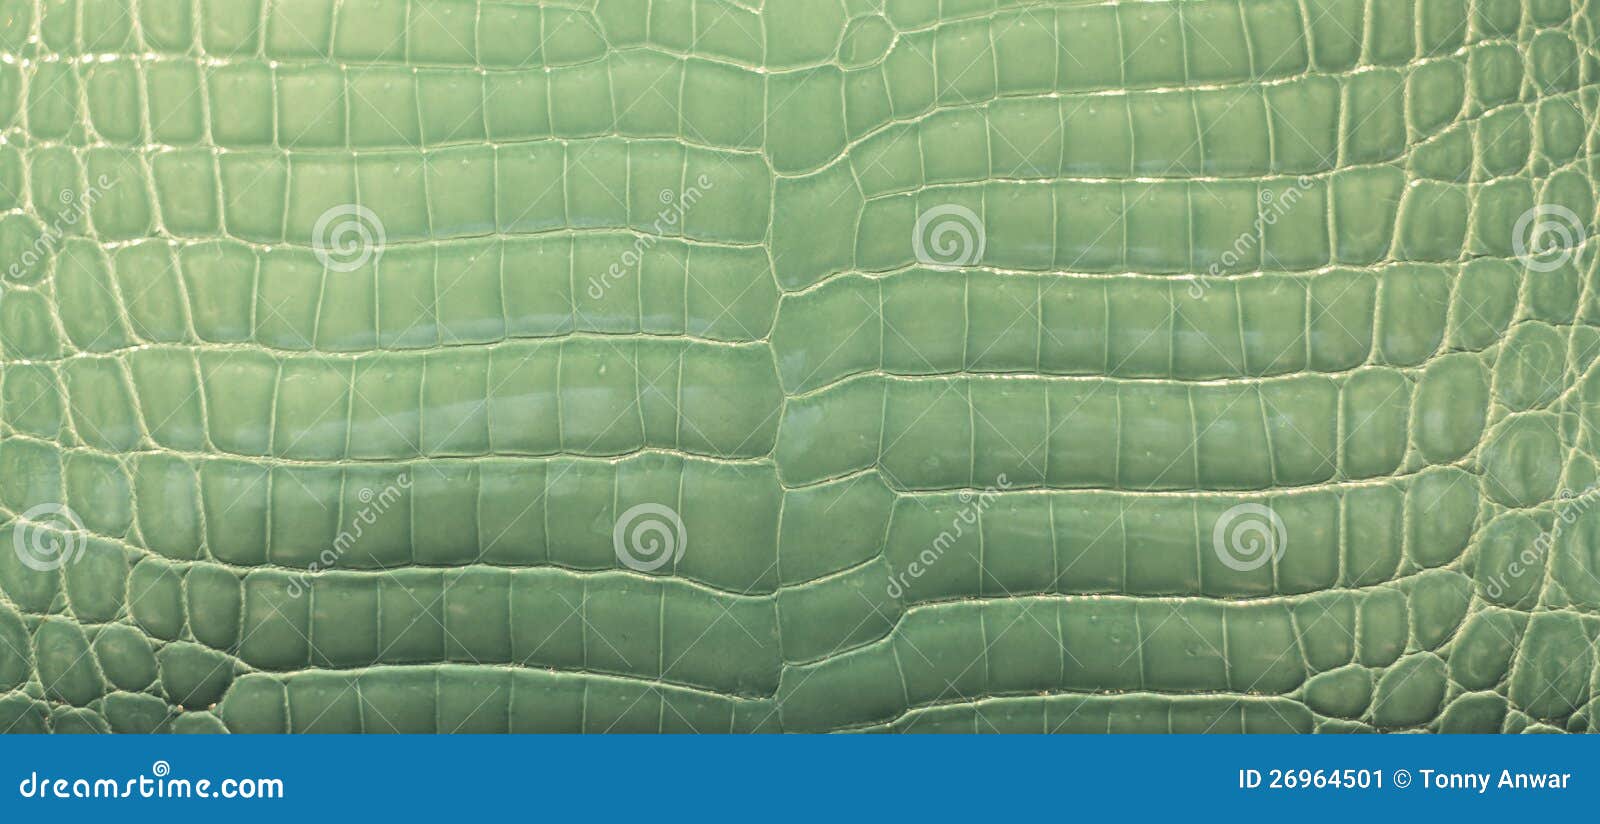 36,718 Green Crocodile Skin Images, Stock Photos, 3D objects, & Vectors